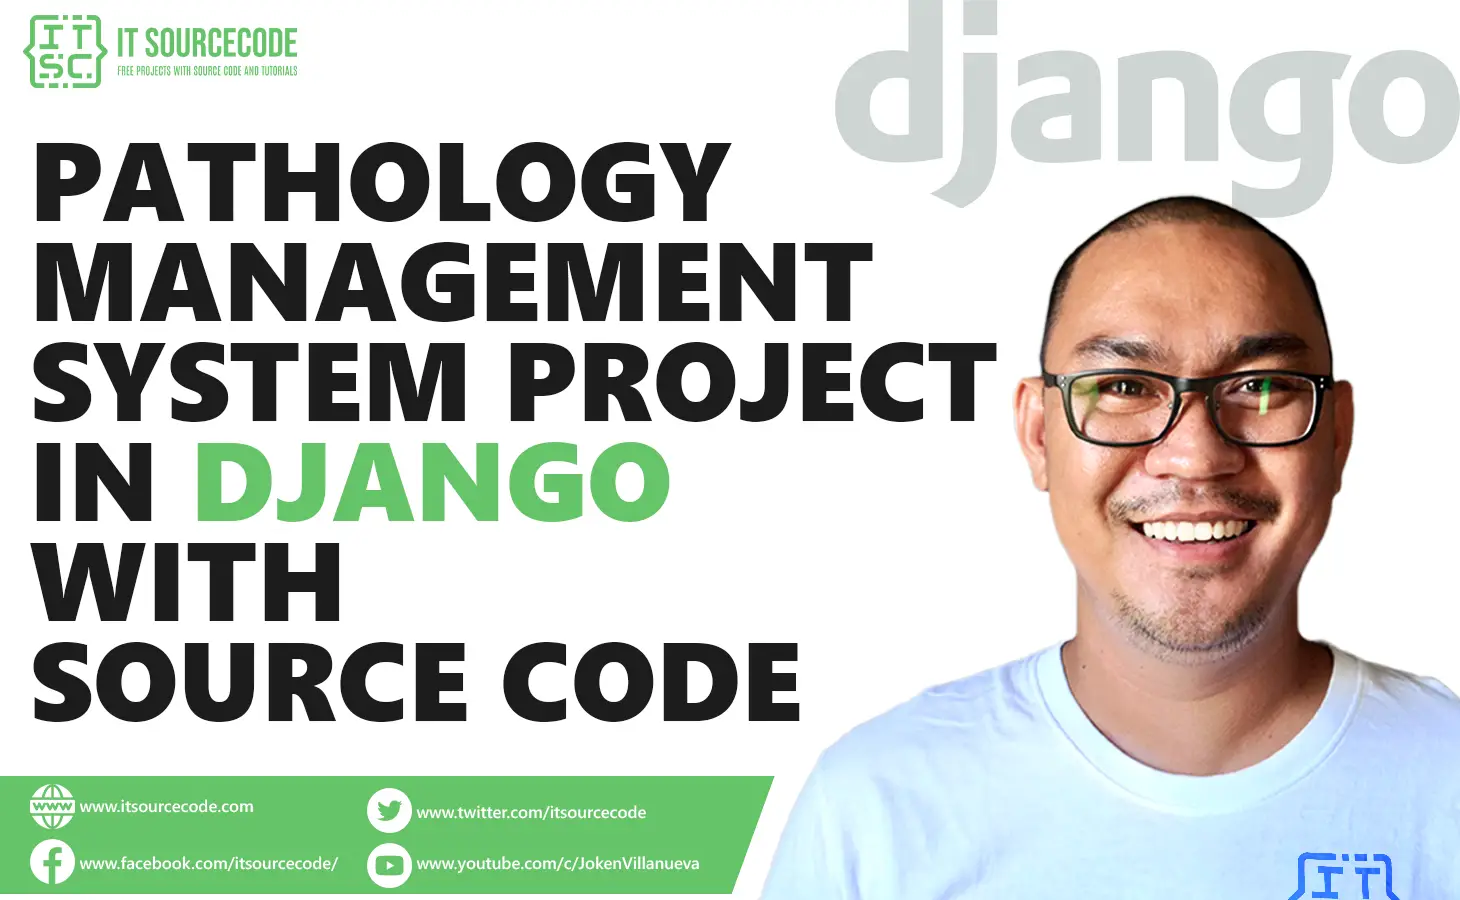 Pathology Management System Project in Django with Source Code